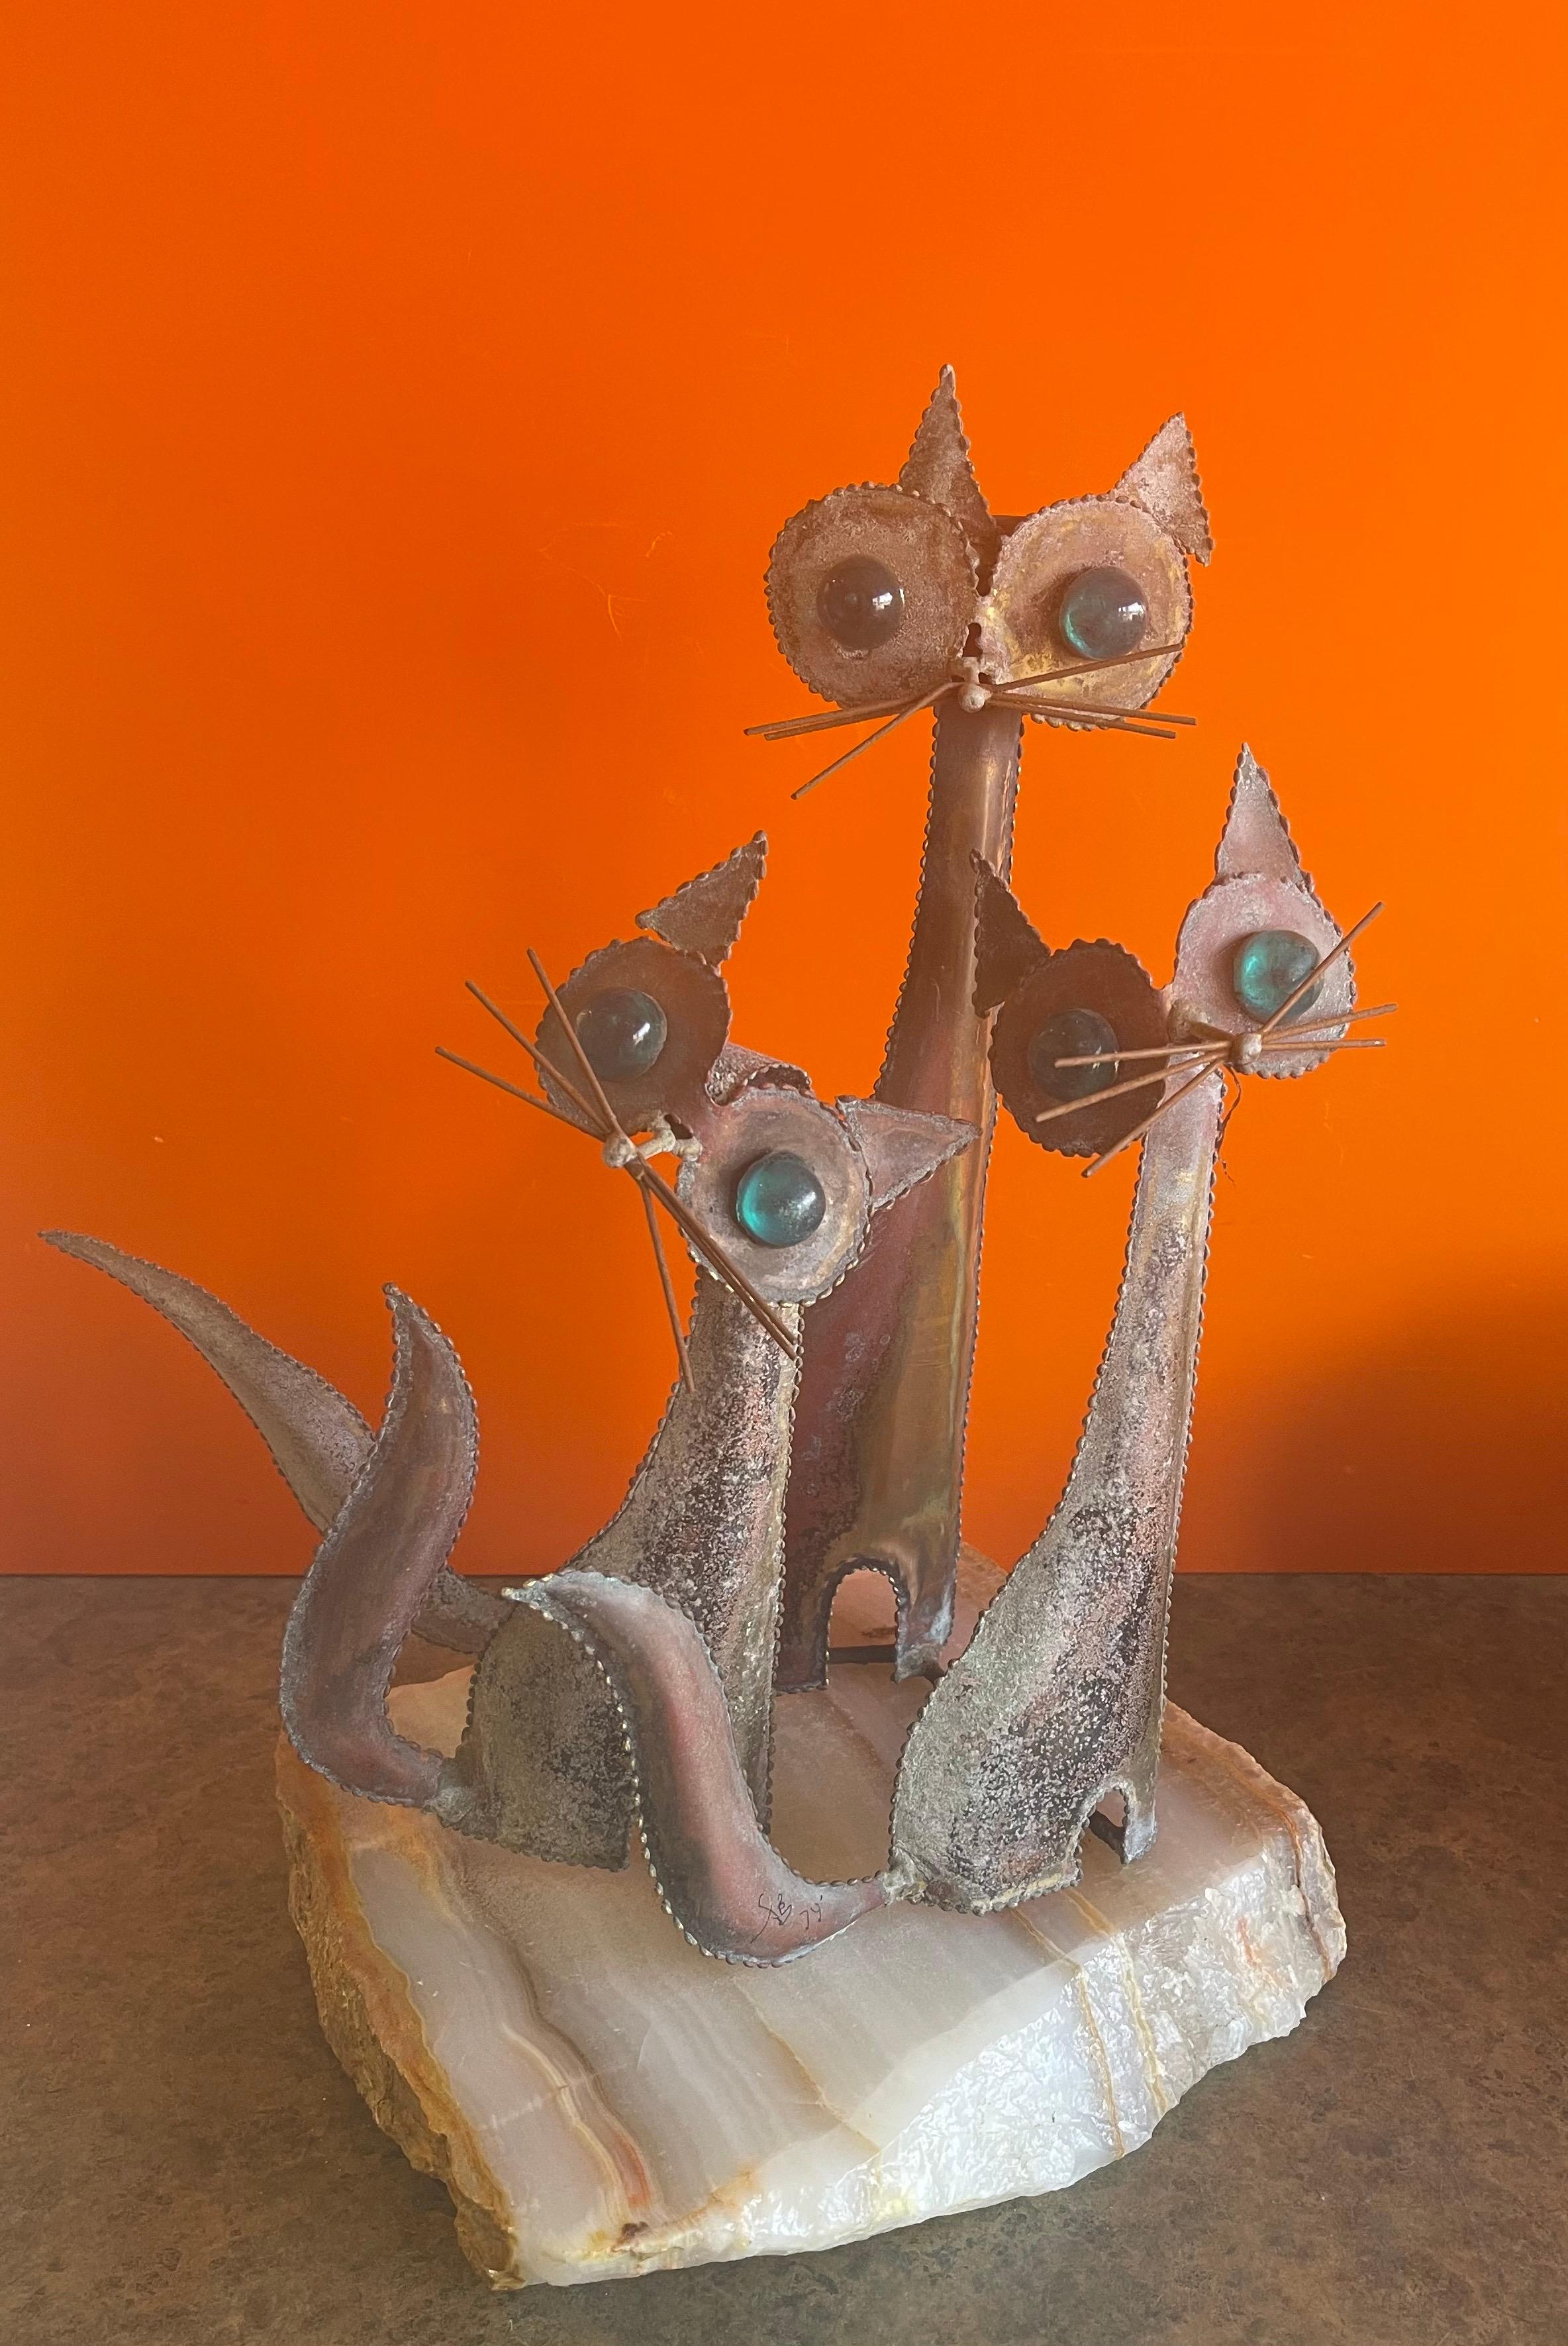 A very cool and rare cats sculpture on a solid block of white onyx in the style of C. Jere, circa 1974. The piece is signed and dated and has a wonderful patina. The cats eyes are a bright teal color that blends beautifully with he aged patina of